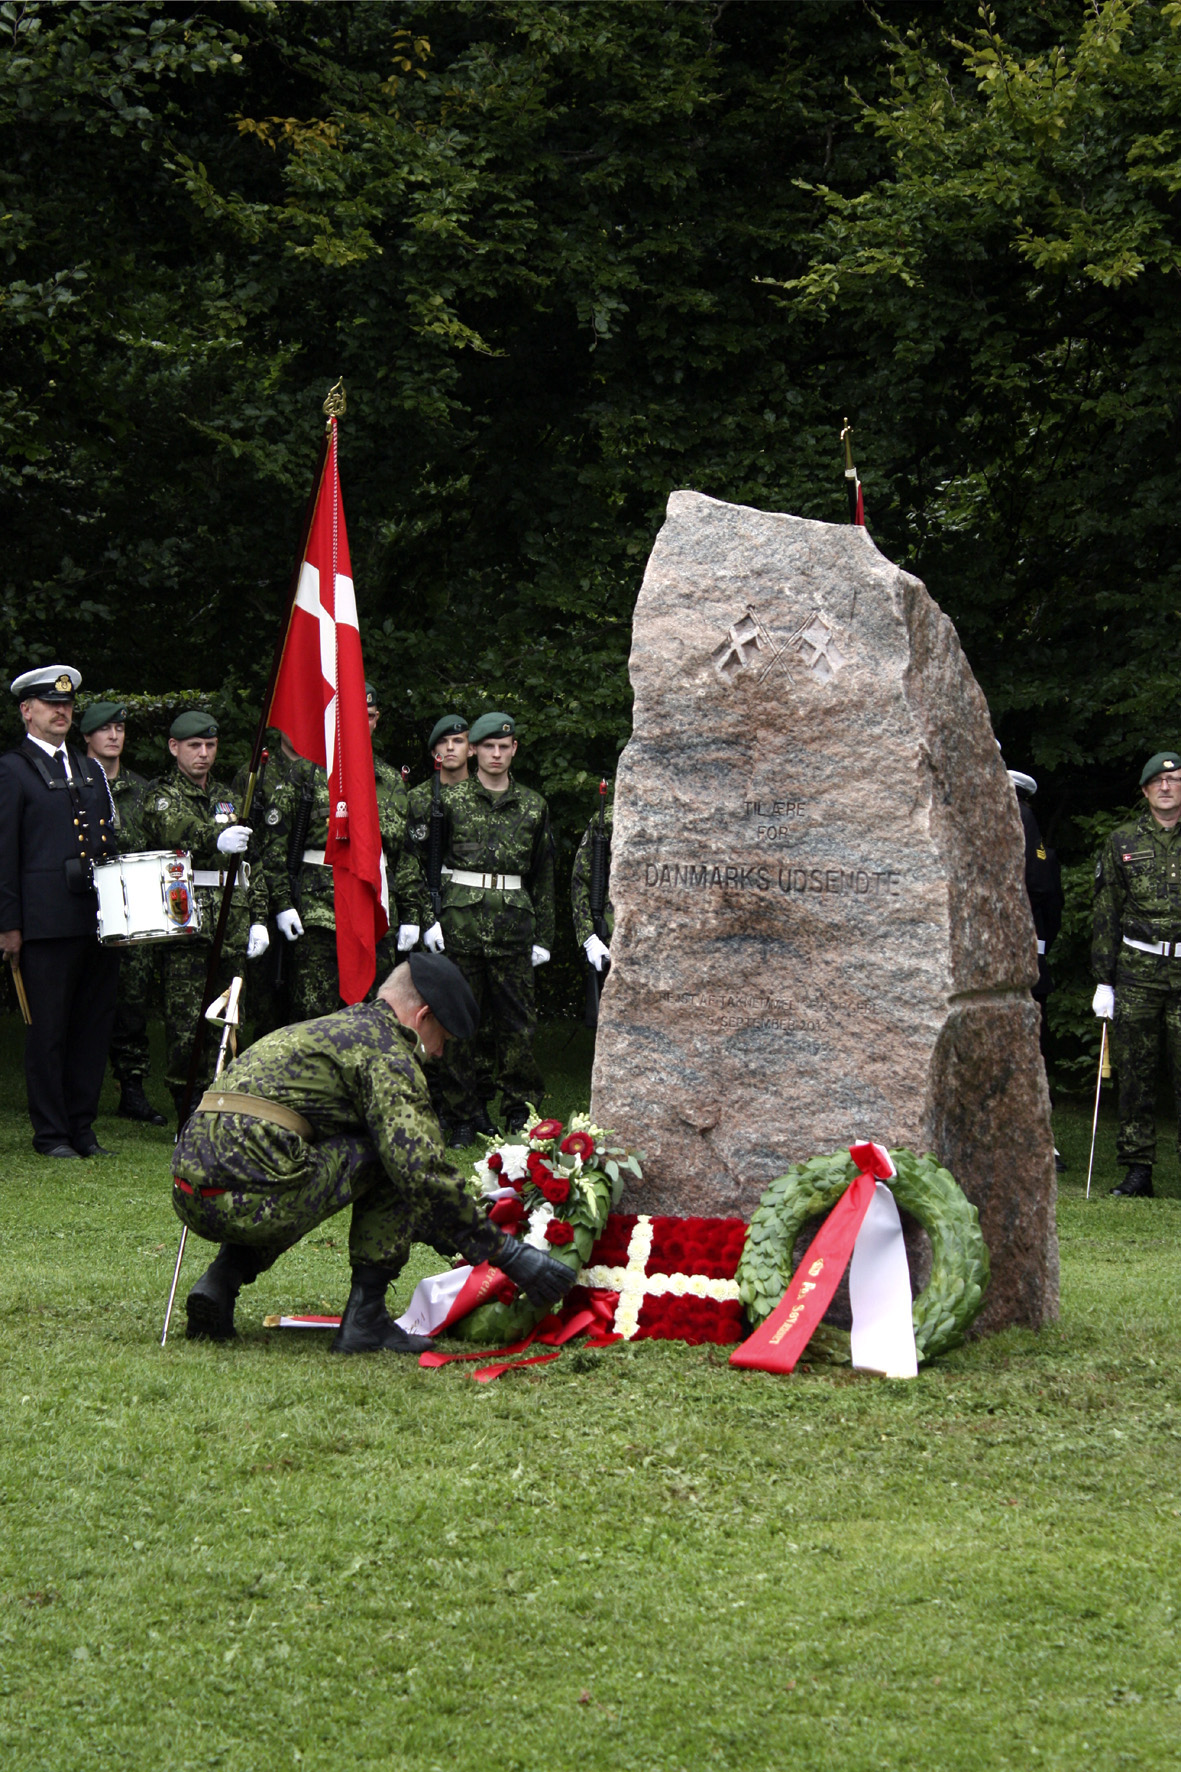 Wreath-laying ceremony during the inauguration of the Monument in Honour of Denmark’s deployed personnel, the Memorial Park in Aarhus. Photo by Mads Daugbjerg 